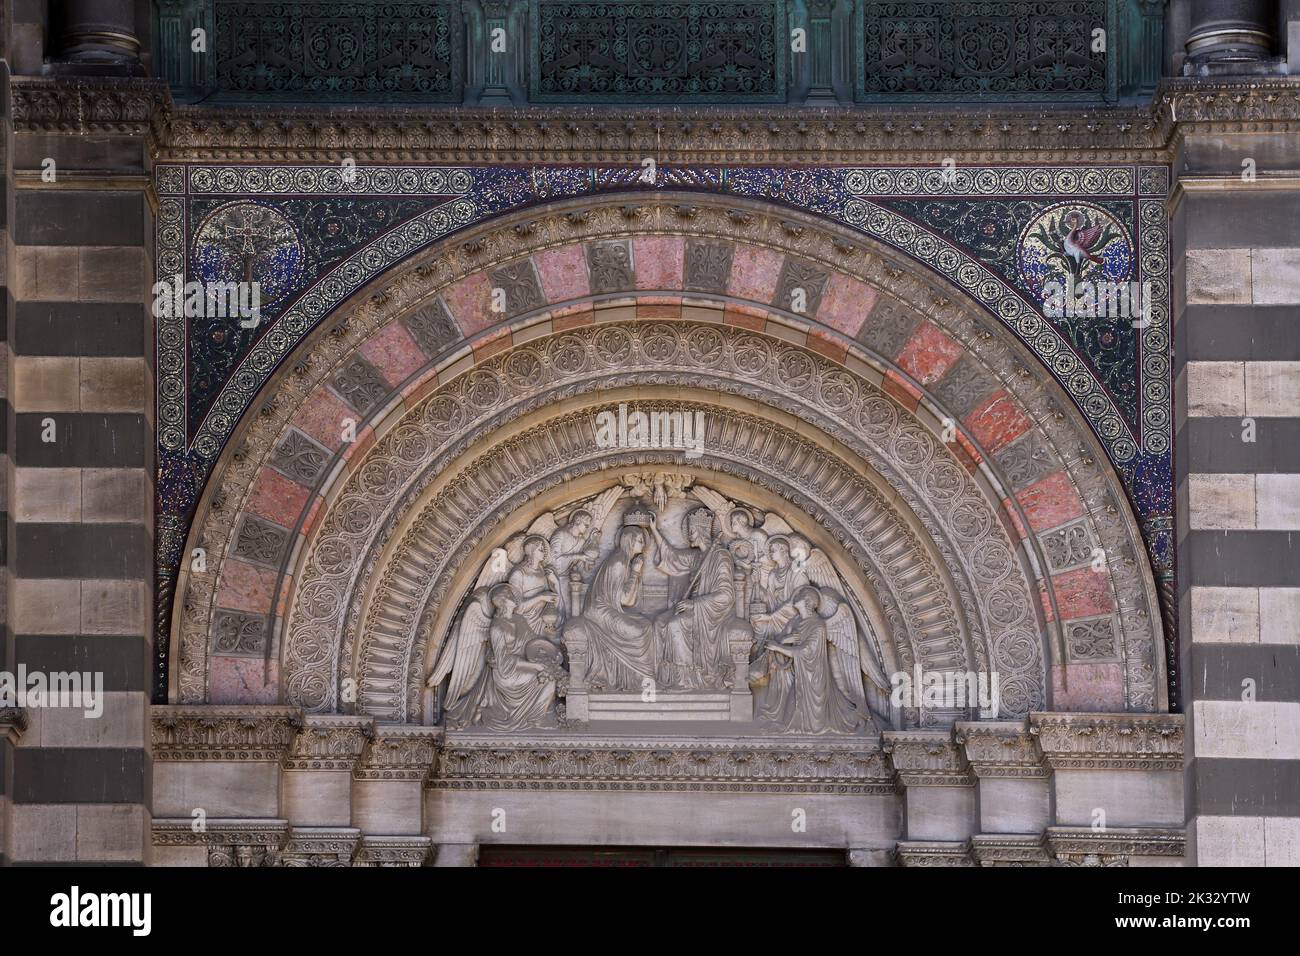 Cathedrale Sainte-Marie-Majeure (Cathedral of Saint Mary Major) Tympanum Above Entrance of the Virgin Mary's Coronation by Eugene Guillaume Marseille Stock Photo